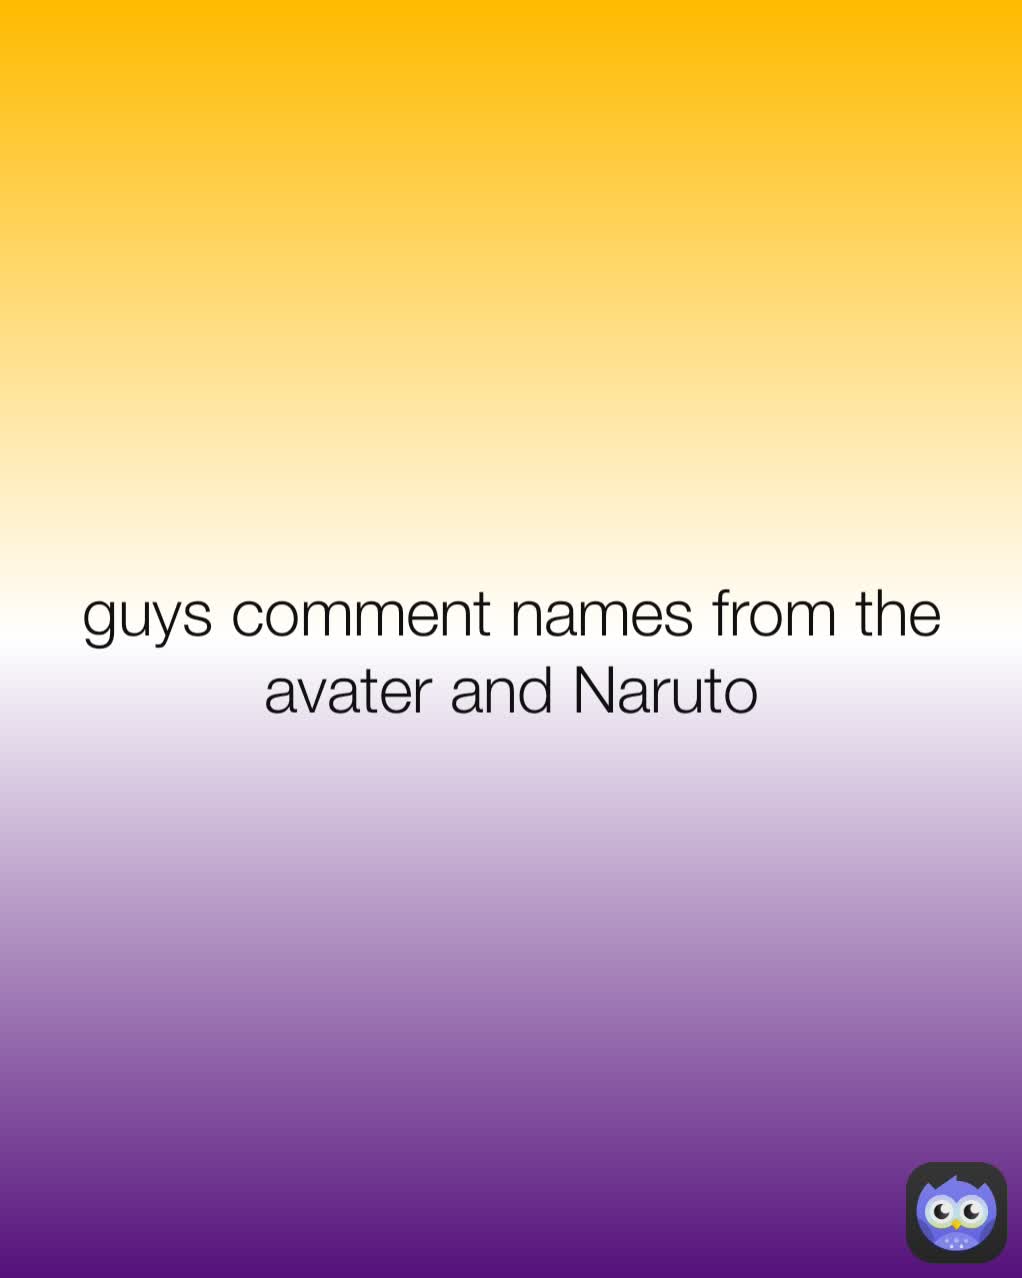 guys comment names from the avater and Naruto